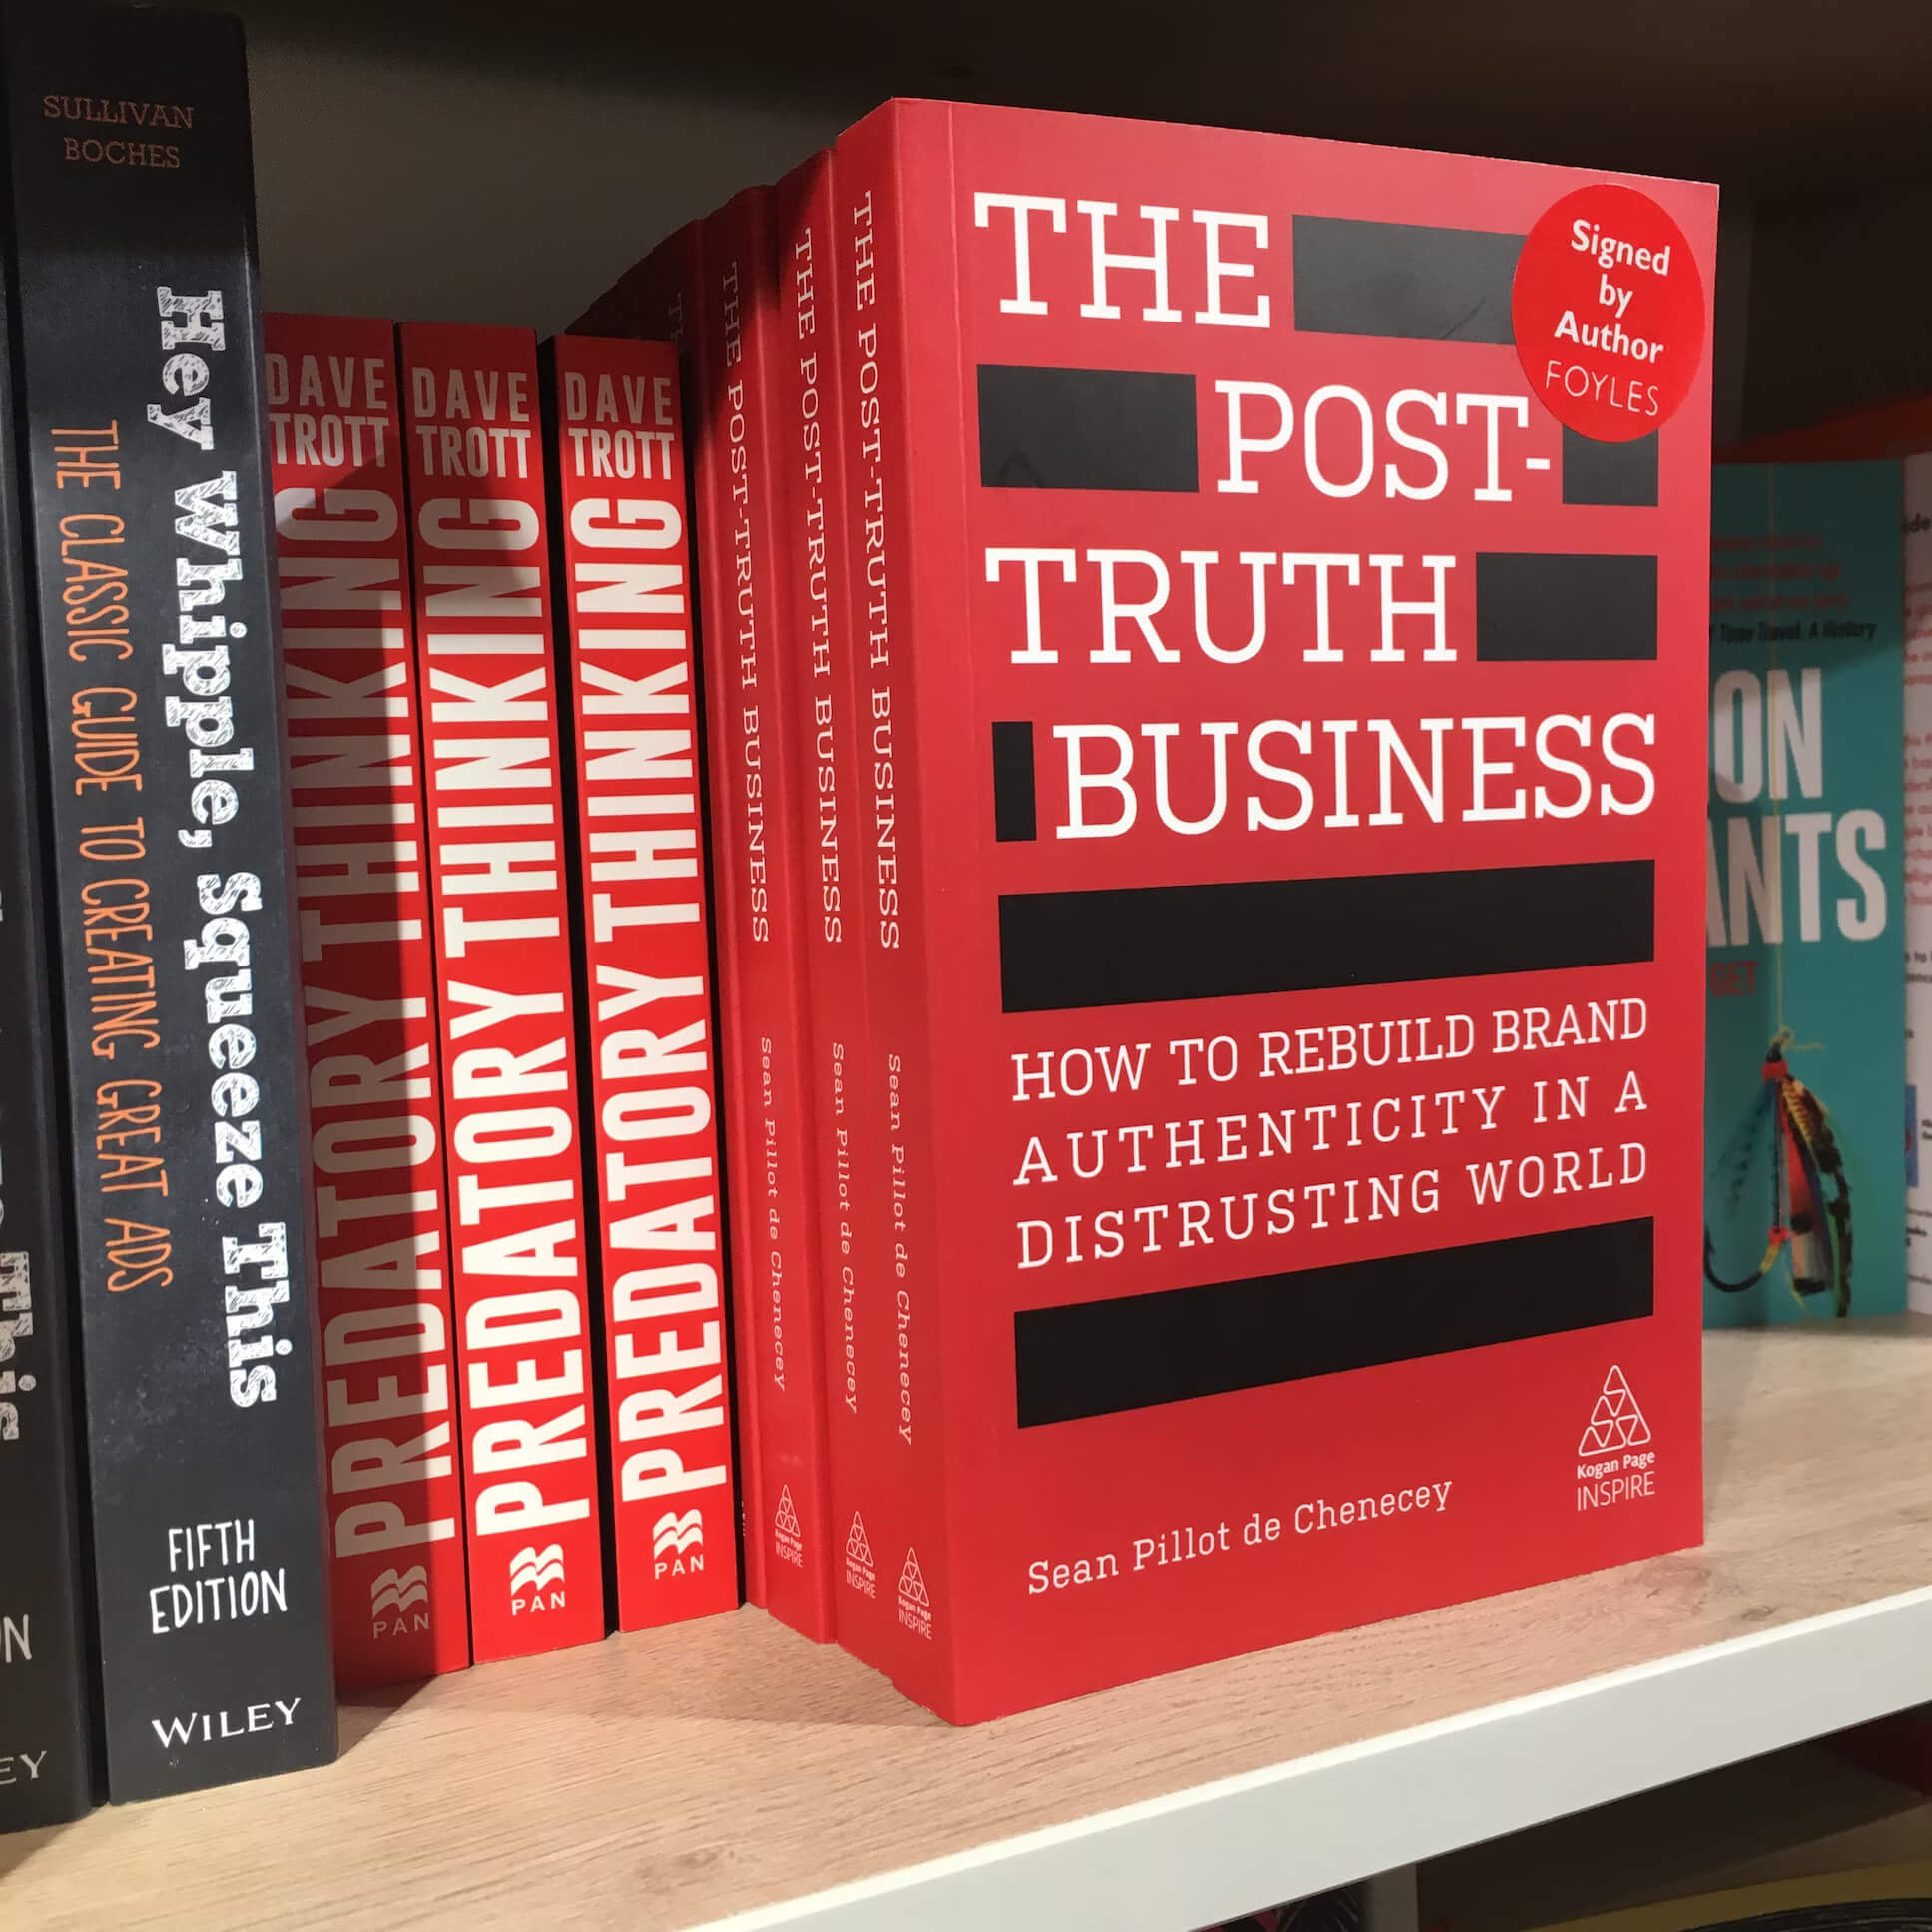 selbey-labs-book-of-the-month-sean-pillot-de-chenecey-the-post-truth-business-foyles-signal-strength-selbey-anderson-difference-makers (1)